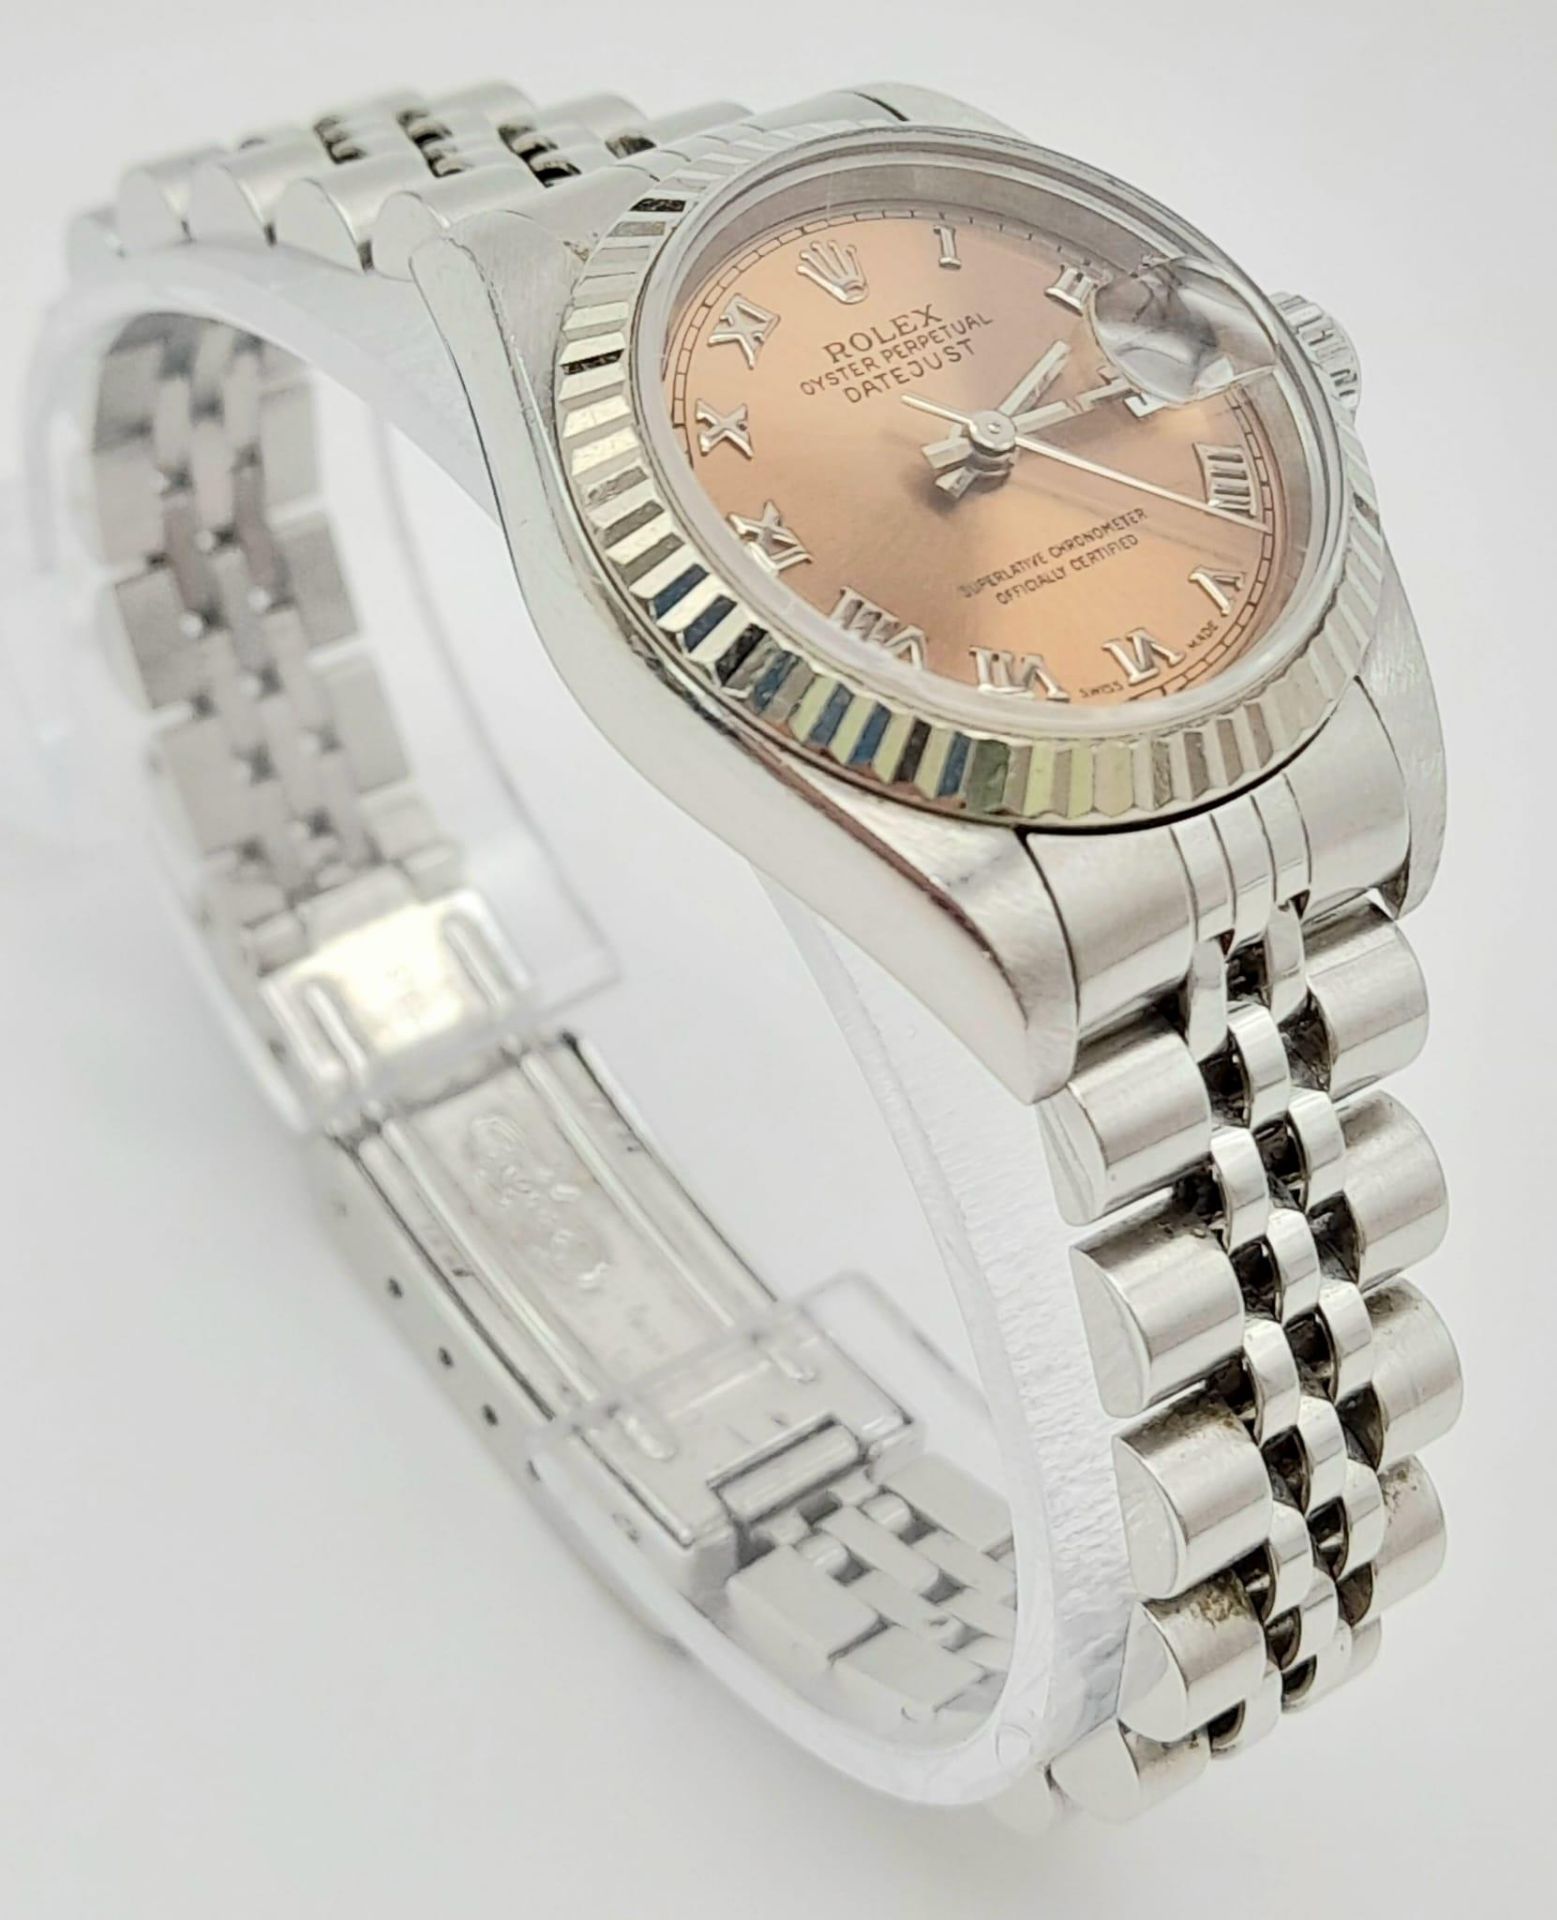 A Rolex Perpetual Datejust Ladies Watch. Stainless steel strap and case - 26mm. Rose gold tone dial. - Image 3 of 13